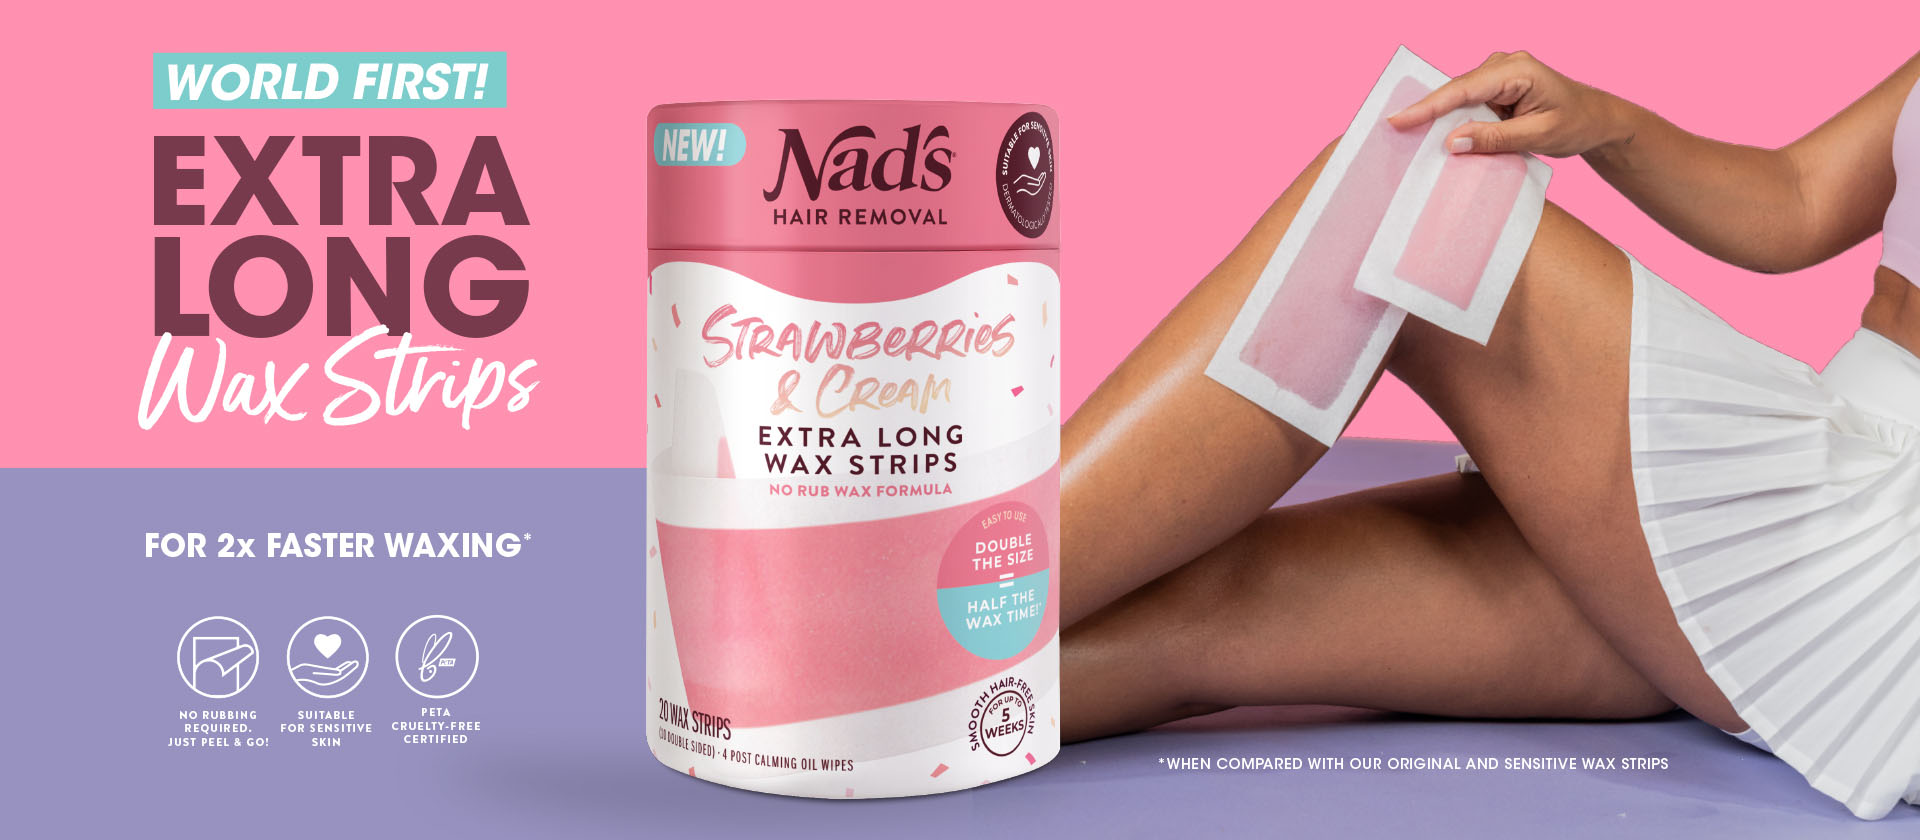 World First Nad's Hair Removal Strawberries and Cream Extra Long Wax Strips | Nad's Hair Removal